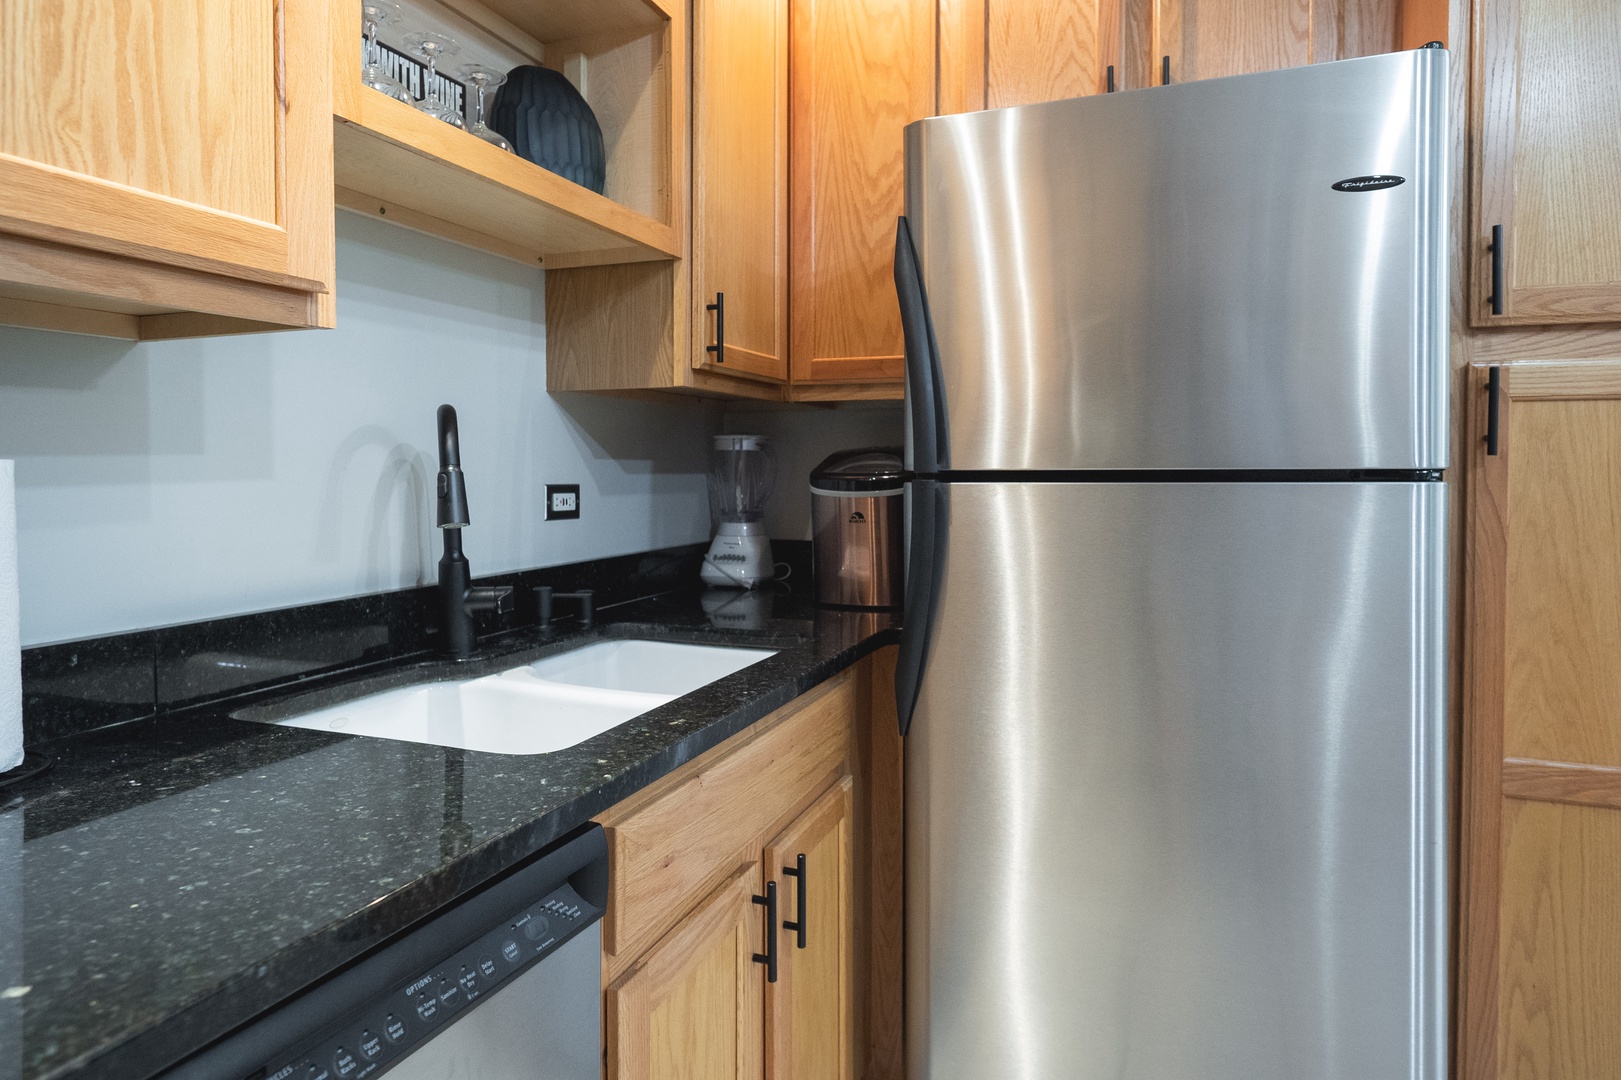 The kitchen offers ample storage space & all the comforts of home